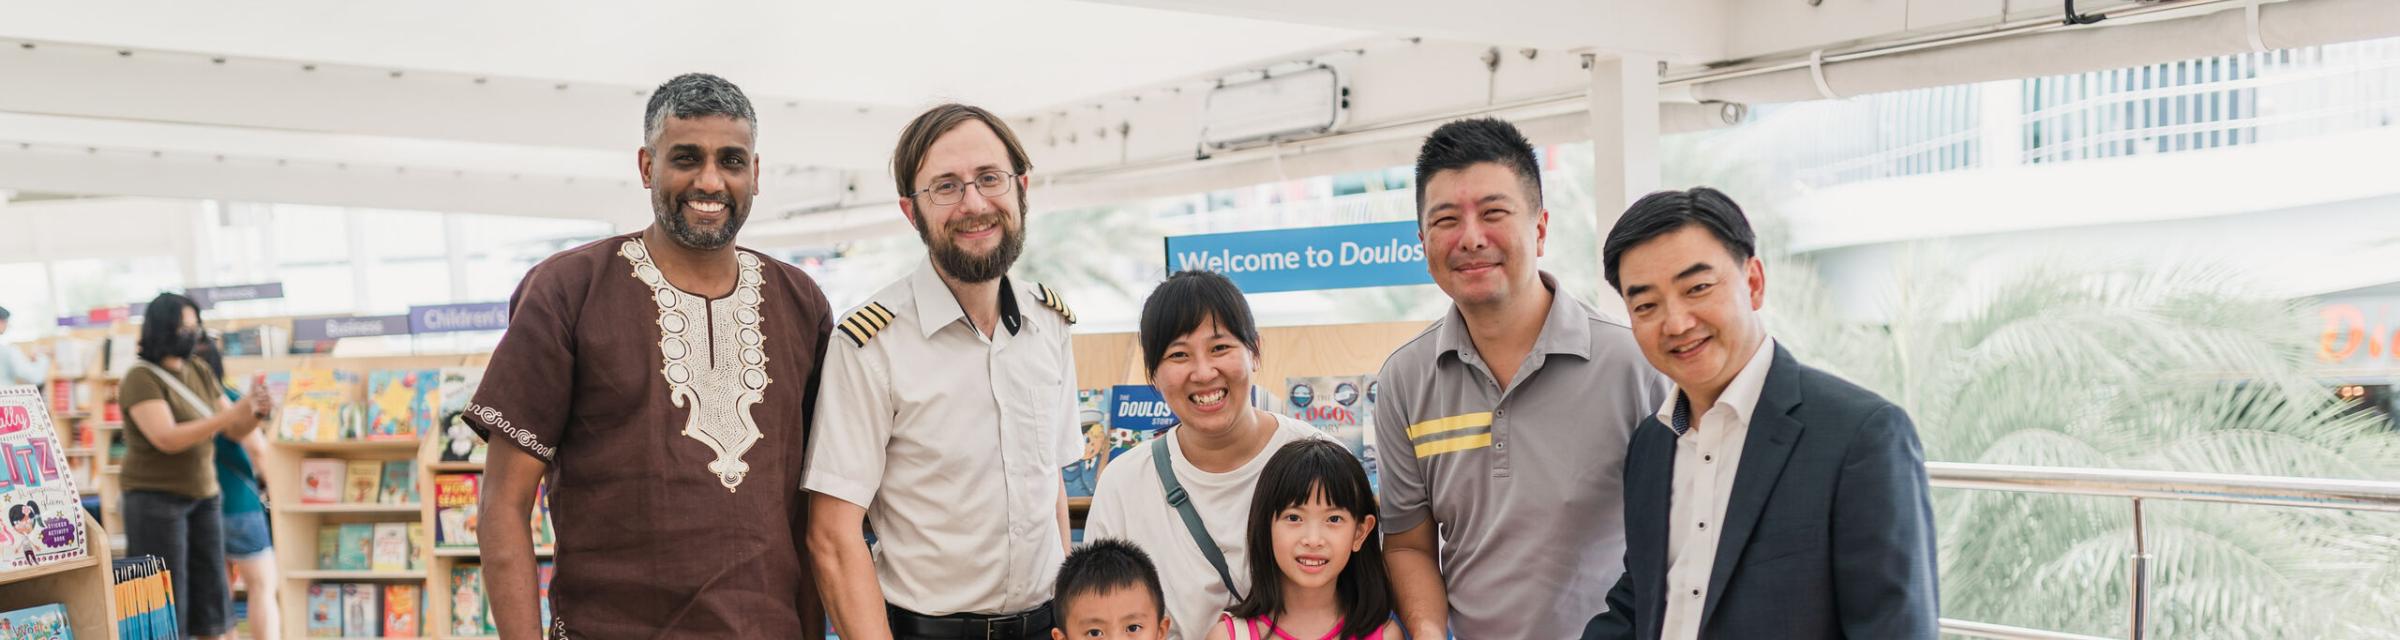 Singapore, Singapore :: Managing Director Pil-Hun Park (Korea) welcomes the first visitors to Doulos Hope's bookfair, alongside Captain James Berry (UK) and CEO, Seelan Govender (South Africa).